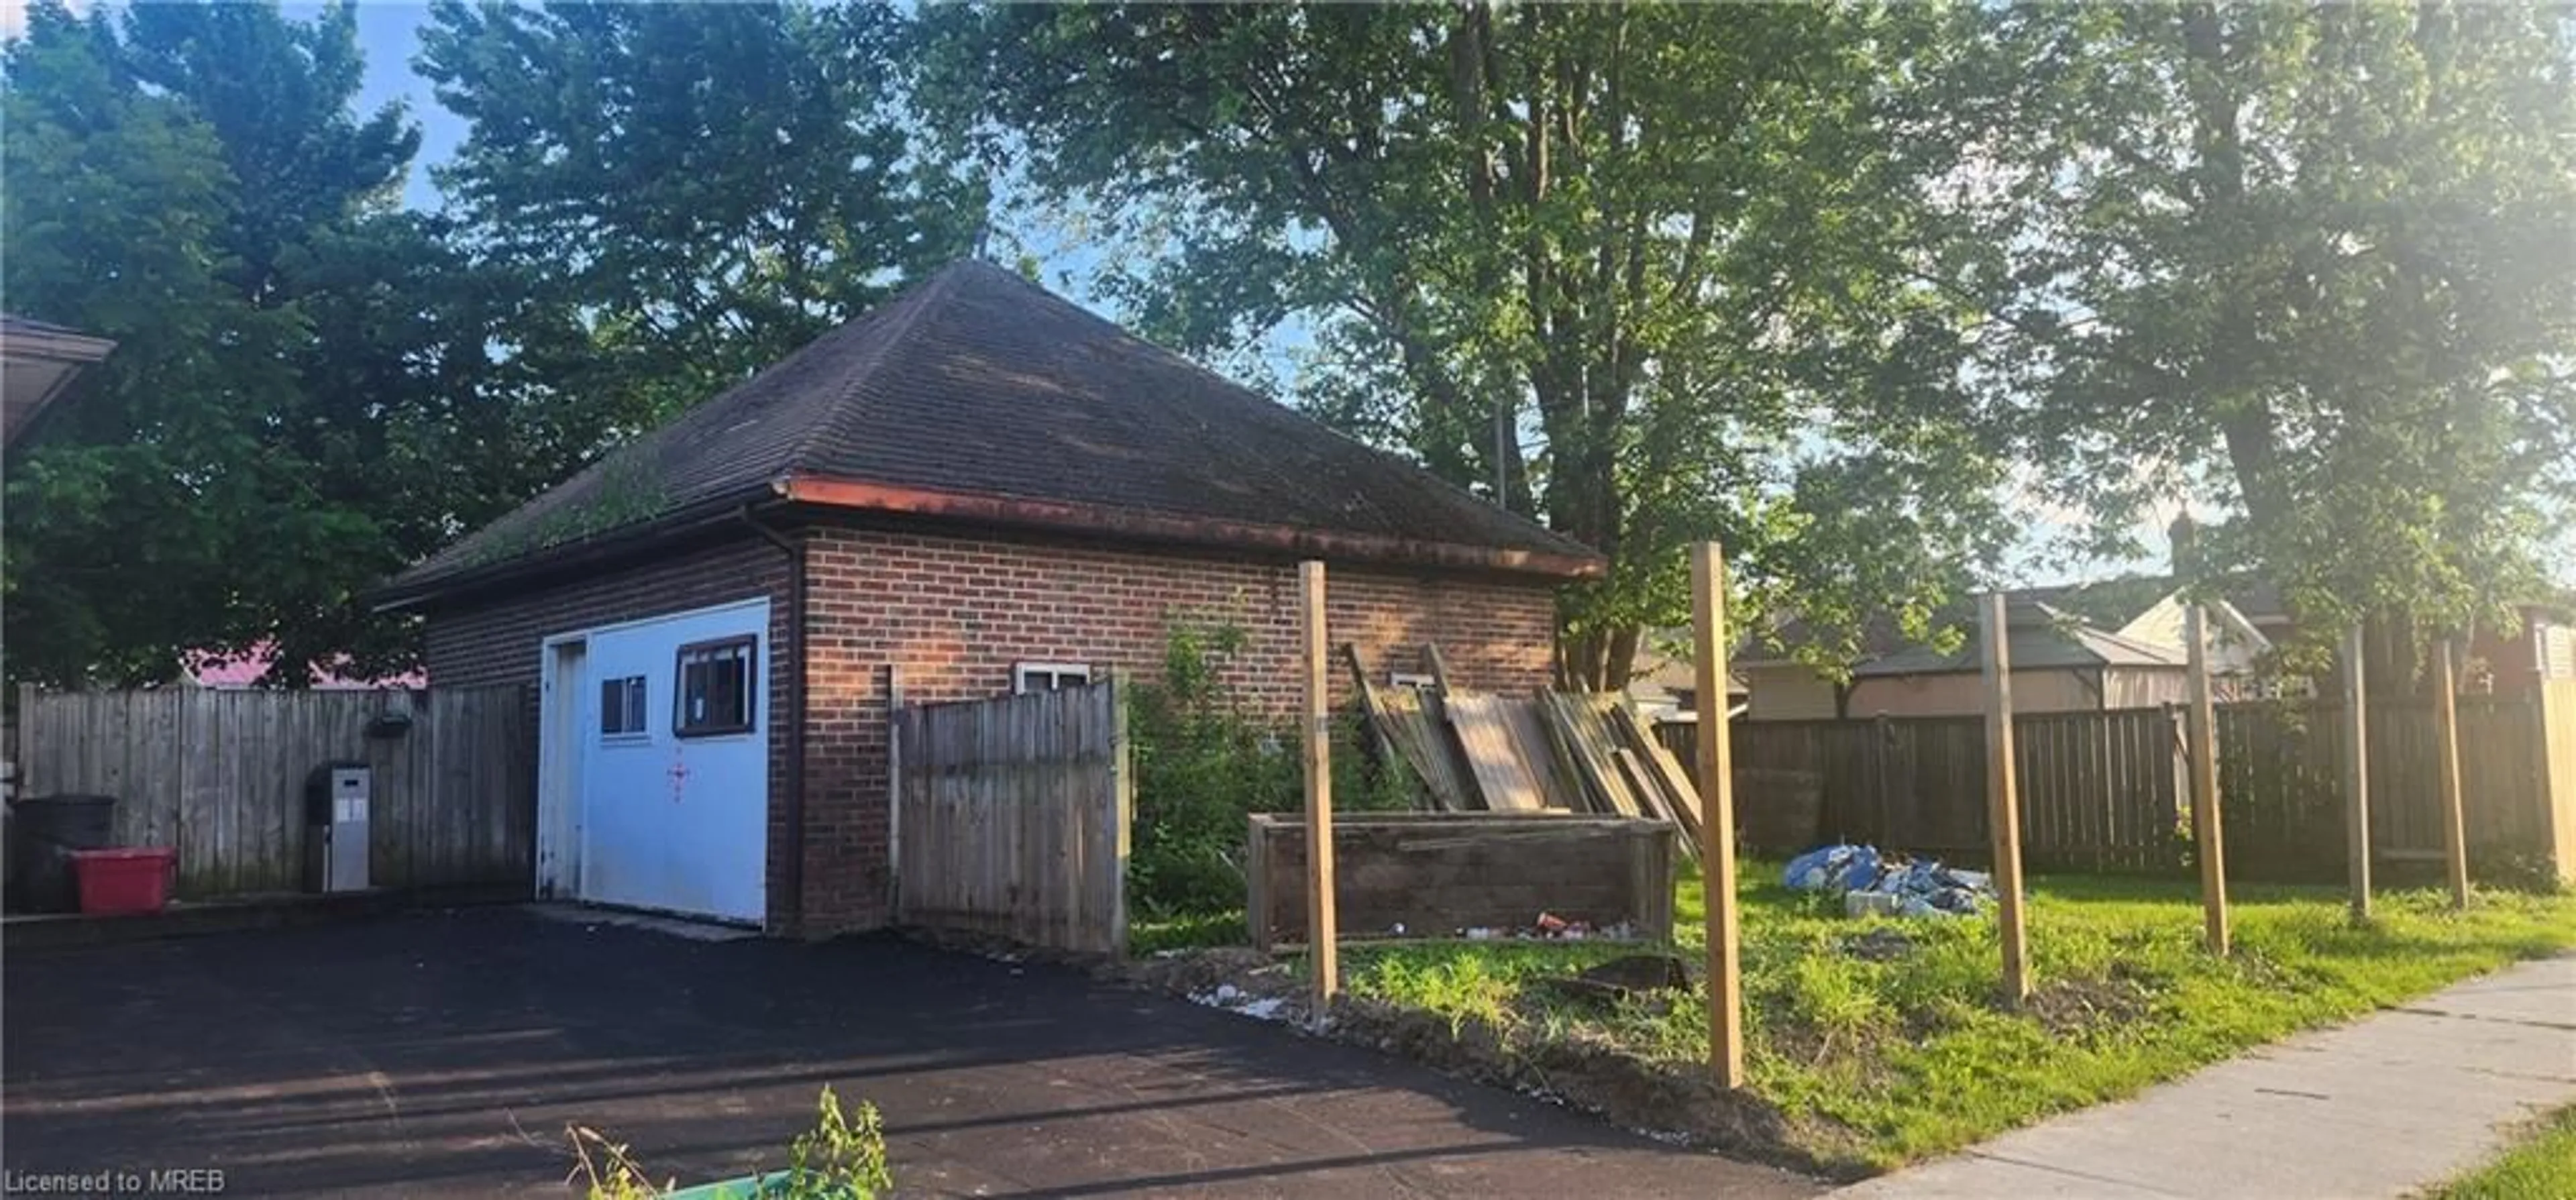 Shed for 204 Kilgour Ave, Welland Ontario L3C 2R2